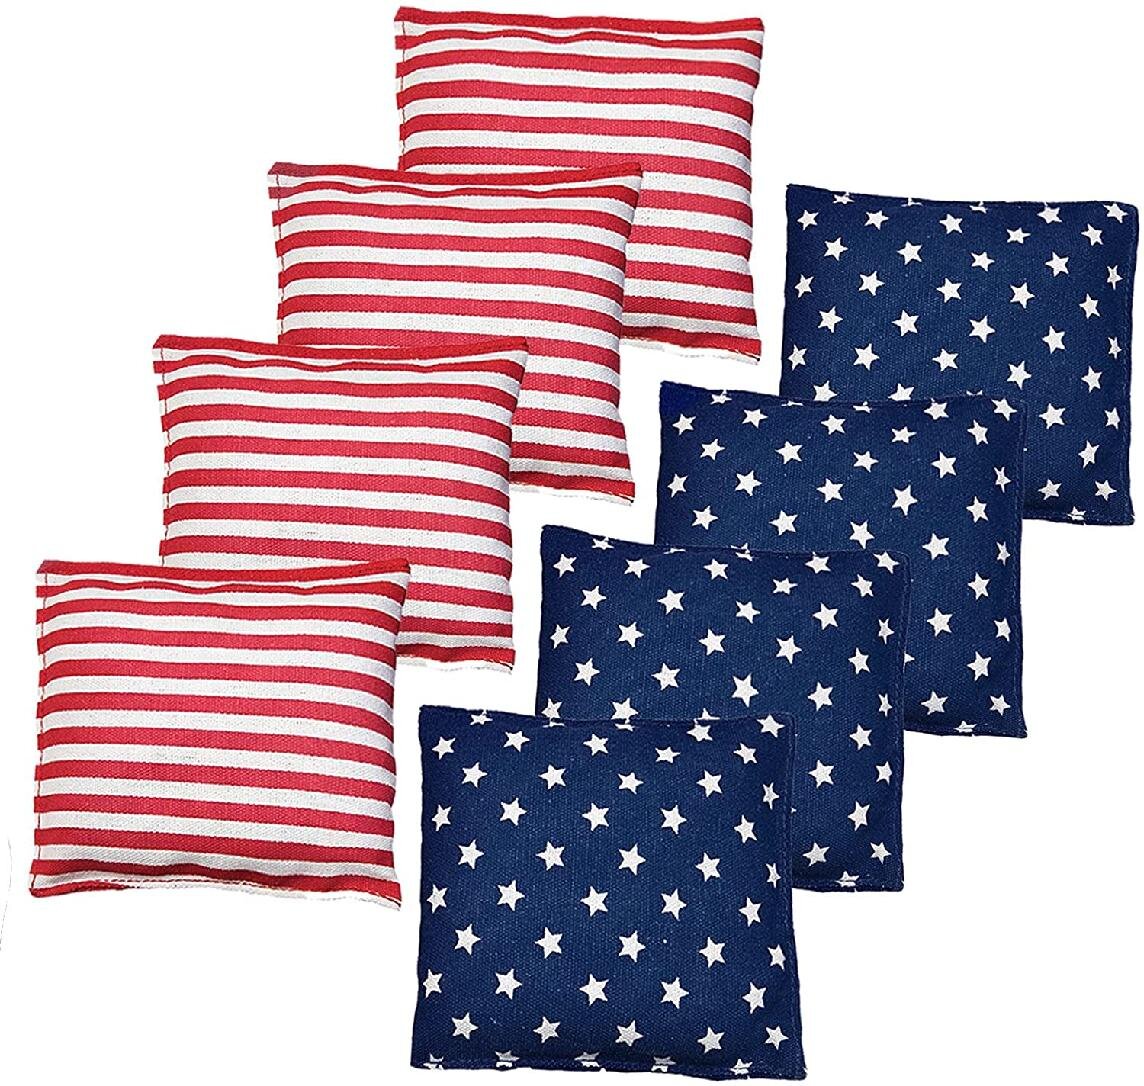 Set of 8 Regulation Size & Weight Includes Free Carry Bag 10 Colors Available Weather Resistant Standard Corn Hole Bags Training Equipment for Tossing Game Cornhole Bean Bags 